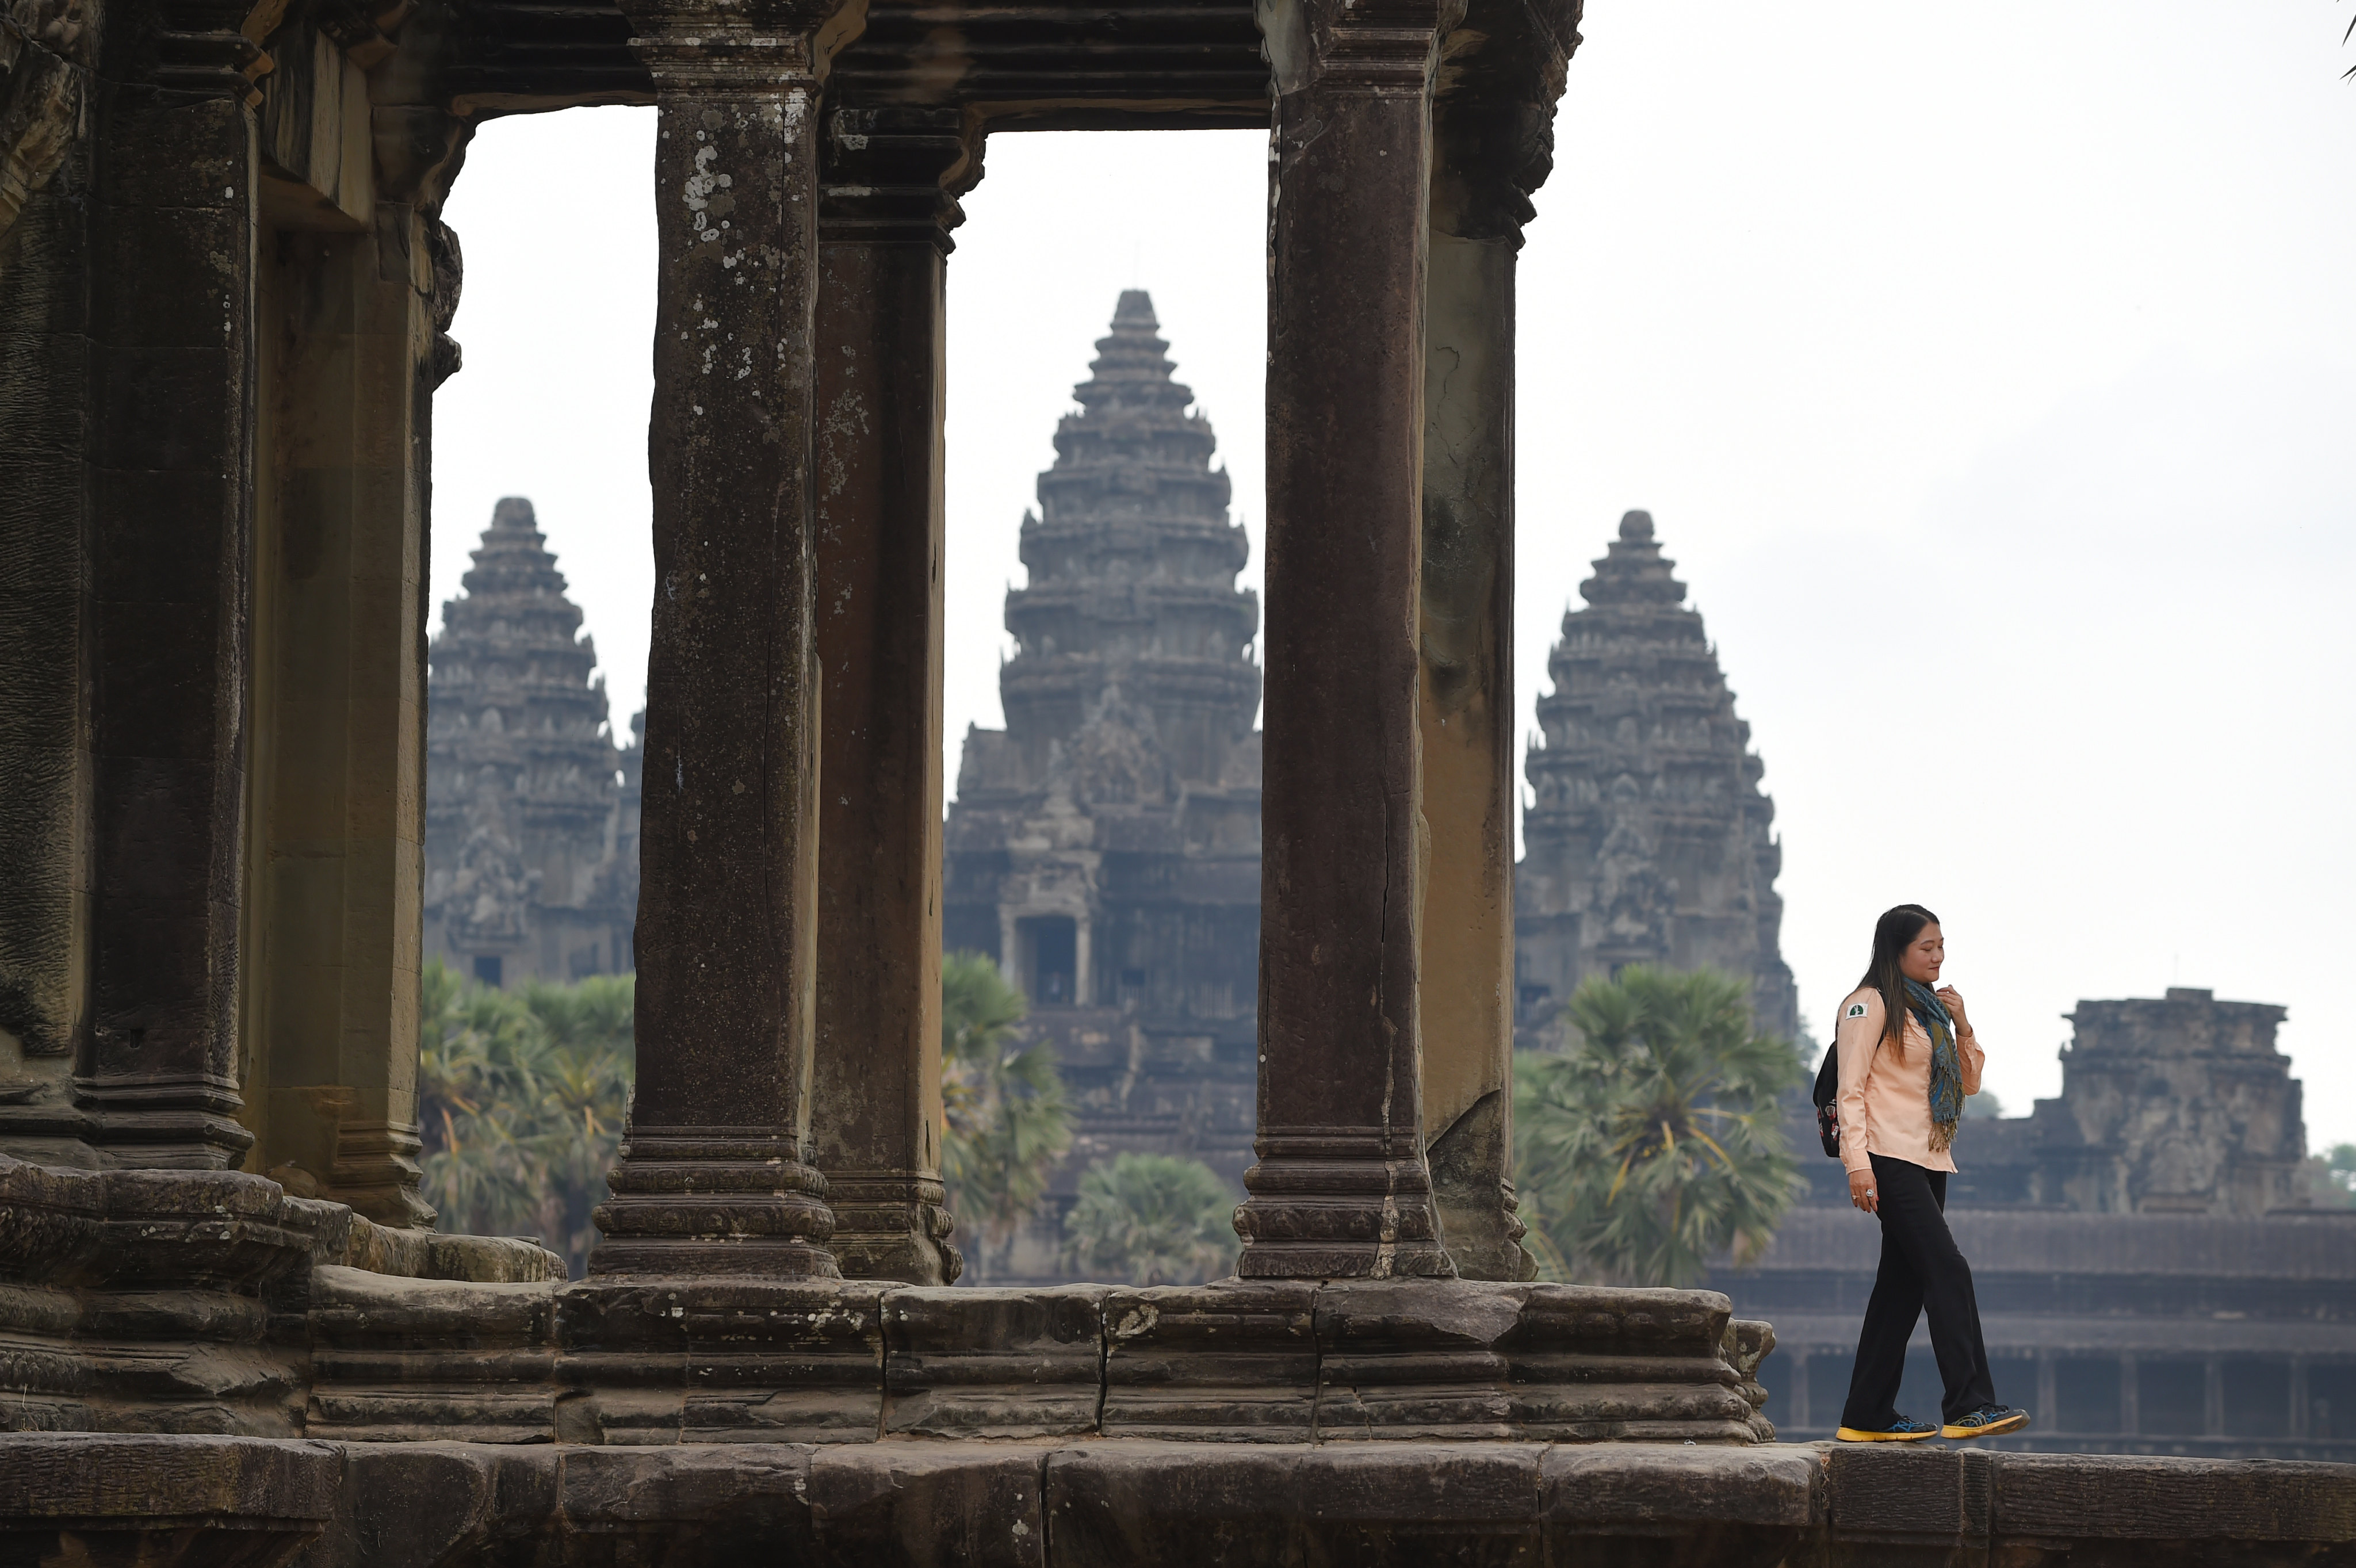 Siem Reap aims to triple its number of international tourist arrivals over the next 15 years. File photo: AFP